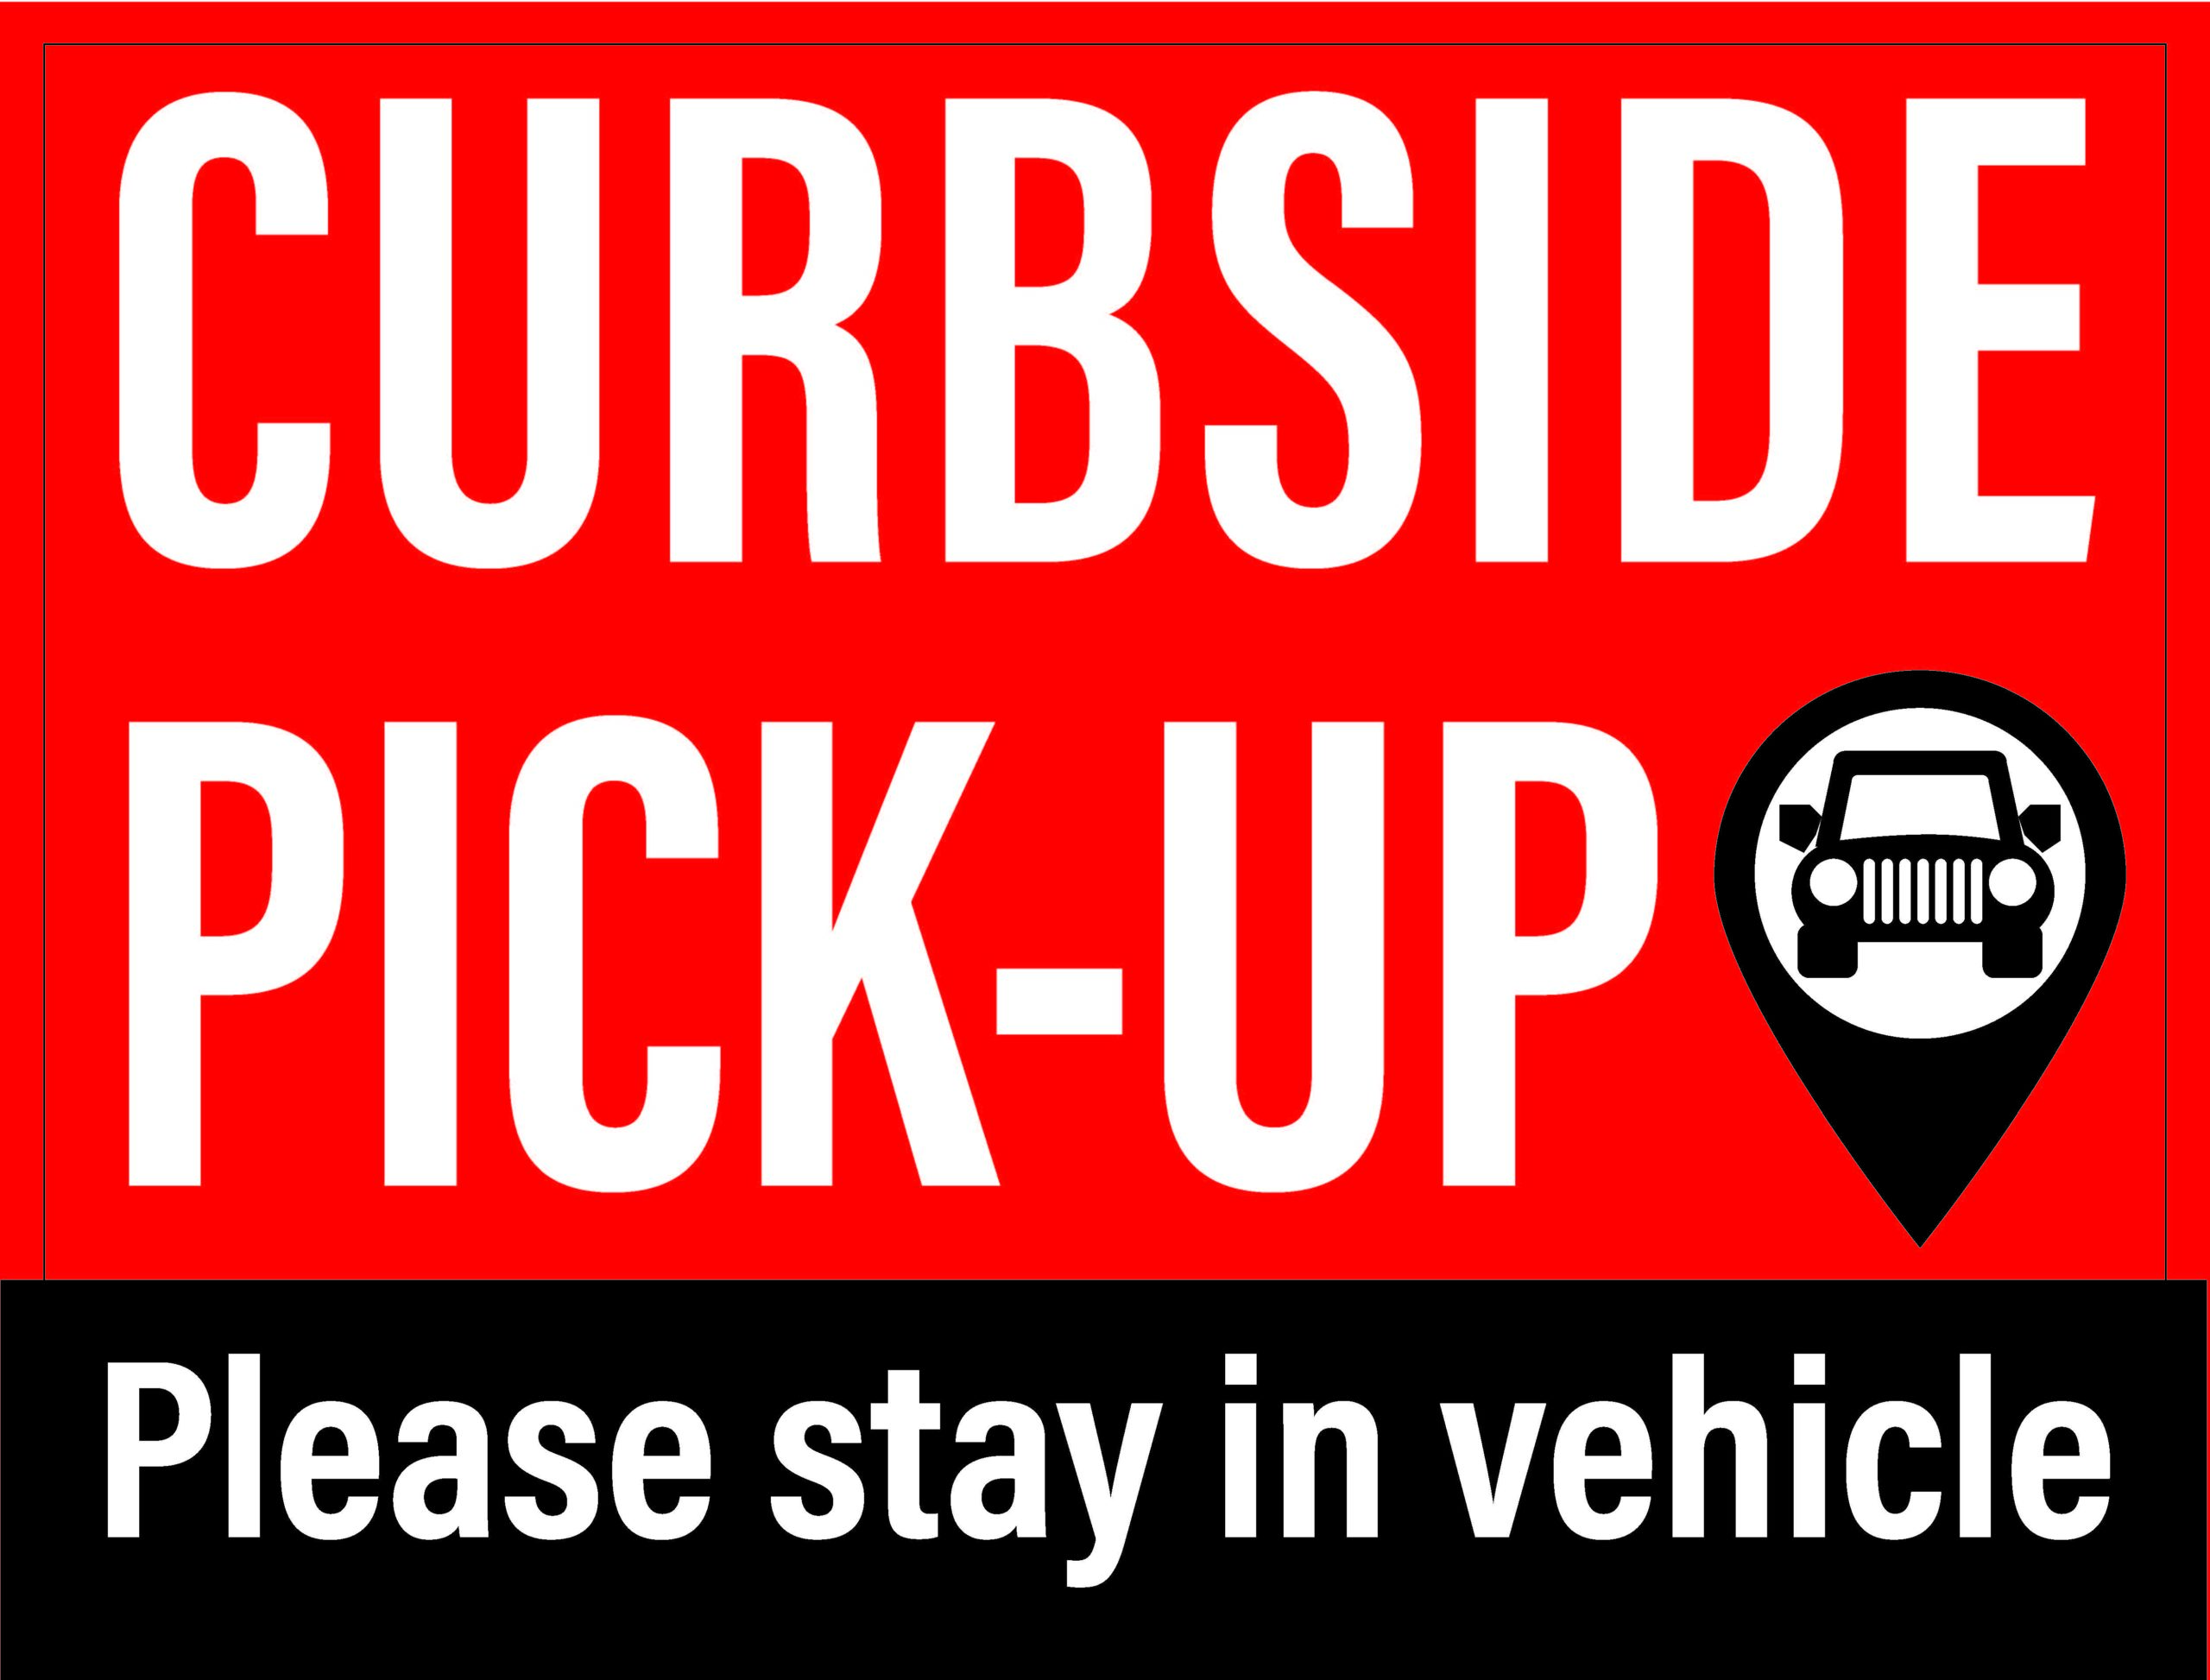 Curbside Pickup Signs 24”x 18” on white corrugated plastic with metal stand (all red) — 2 pack